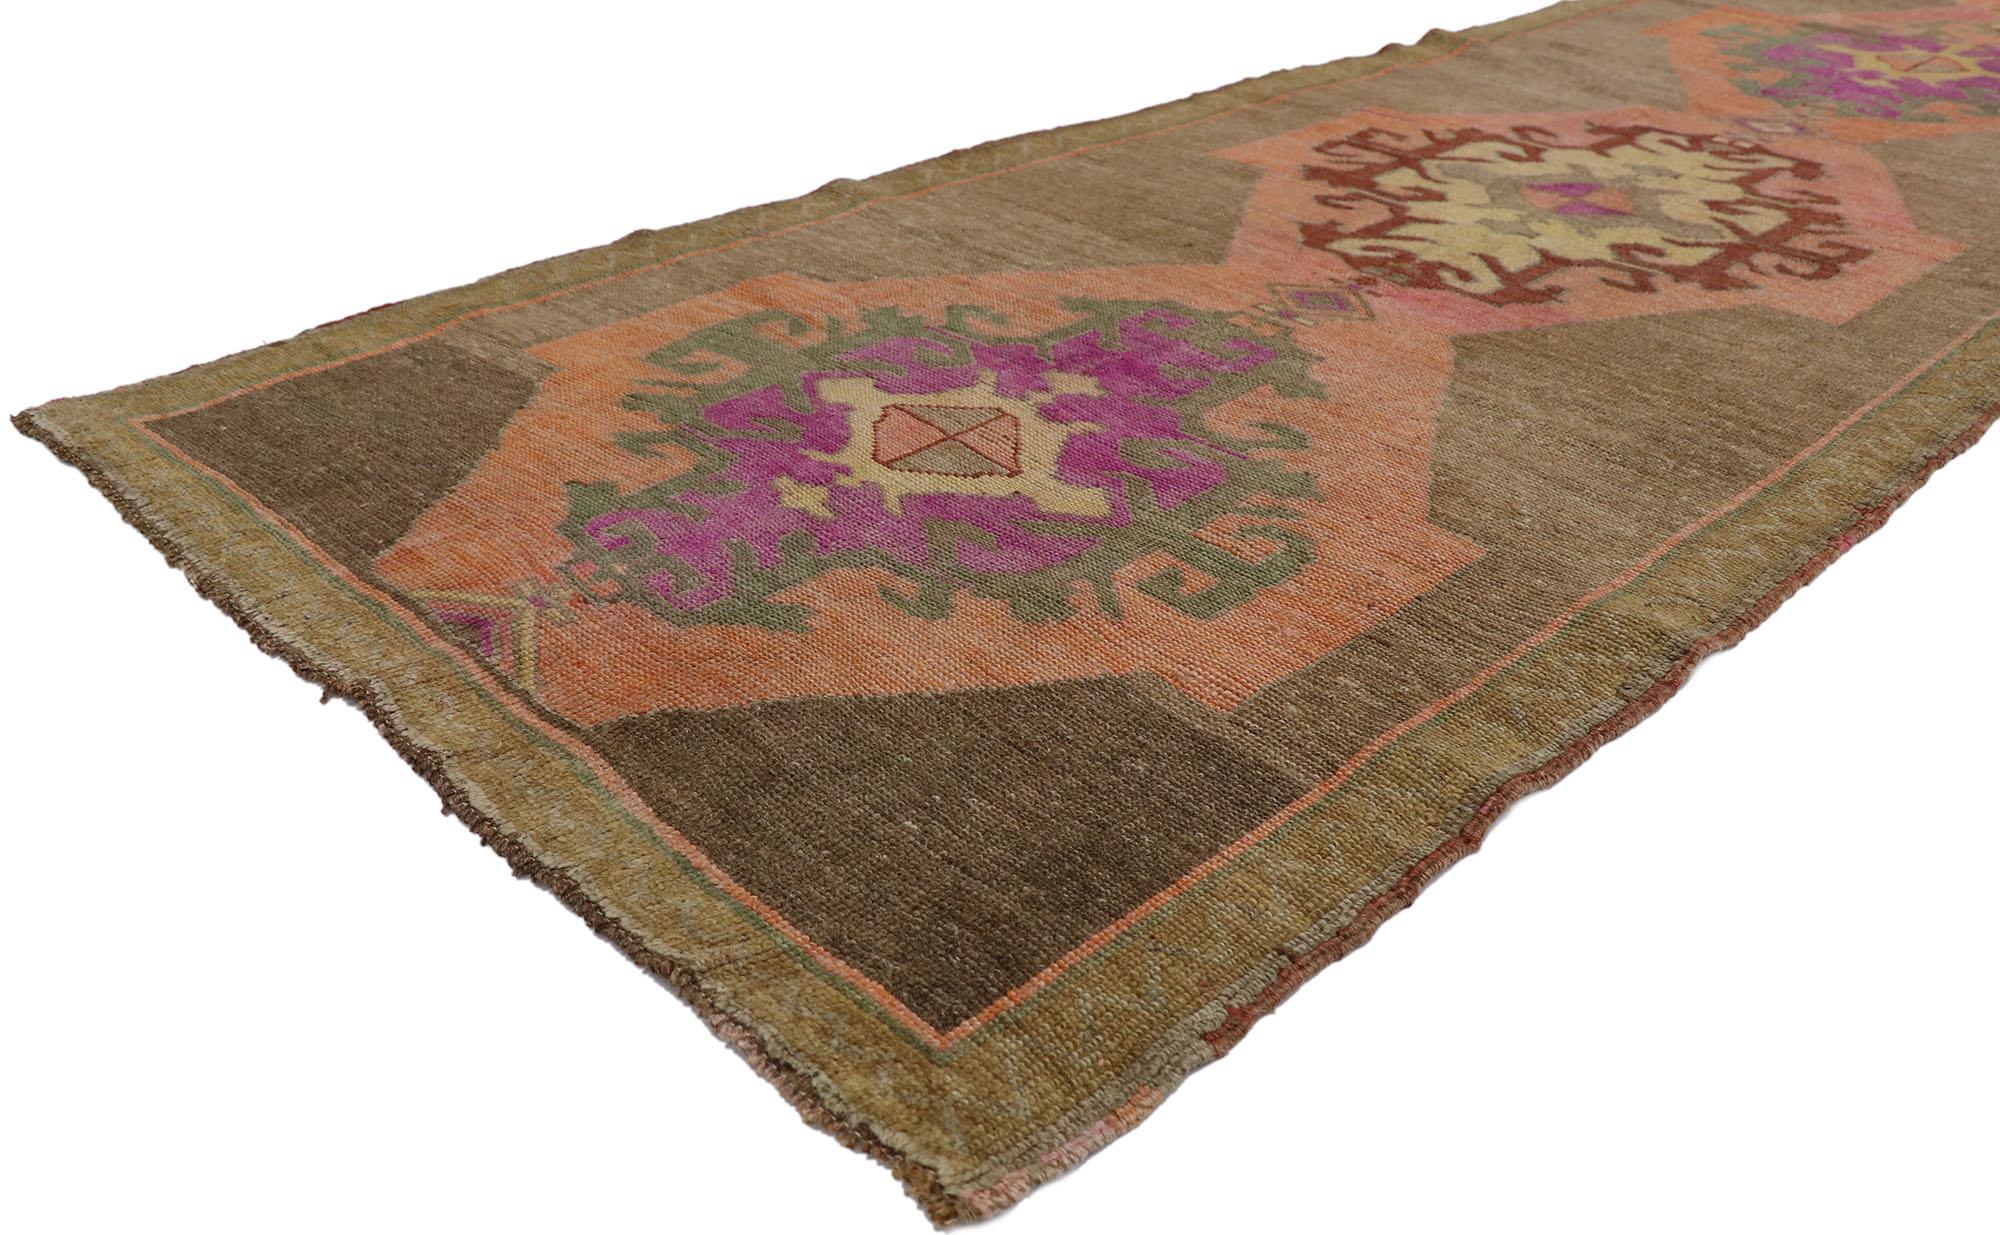 53568 Vintage Turkish Kars Runner with Mid-Century Modern Style 03'07 x 10'03. Full of tiny details and a bold expressive design combined with vibrant colors and modern style, this hand-knotted wool vintage Turkish Kars runner is a captivating